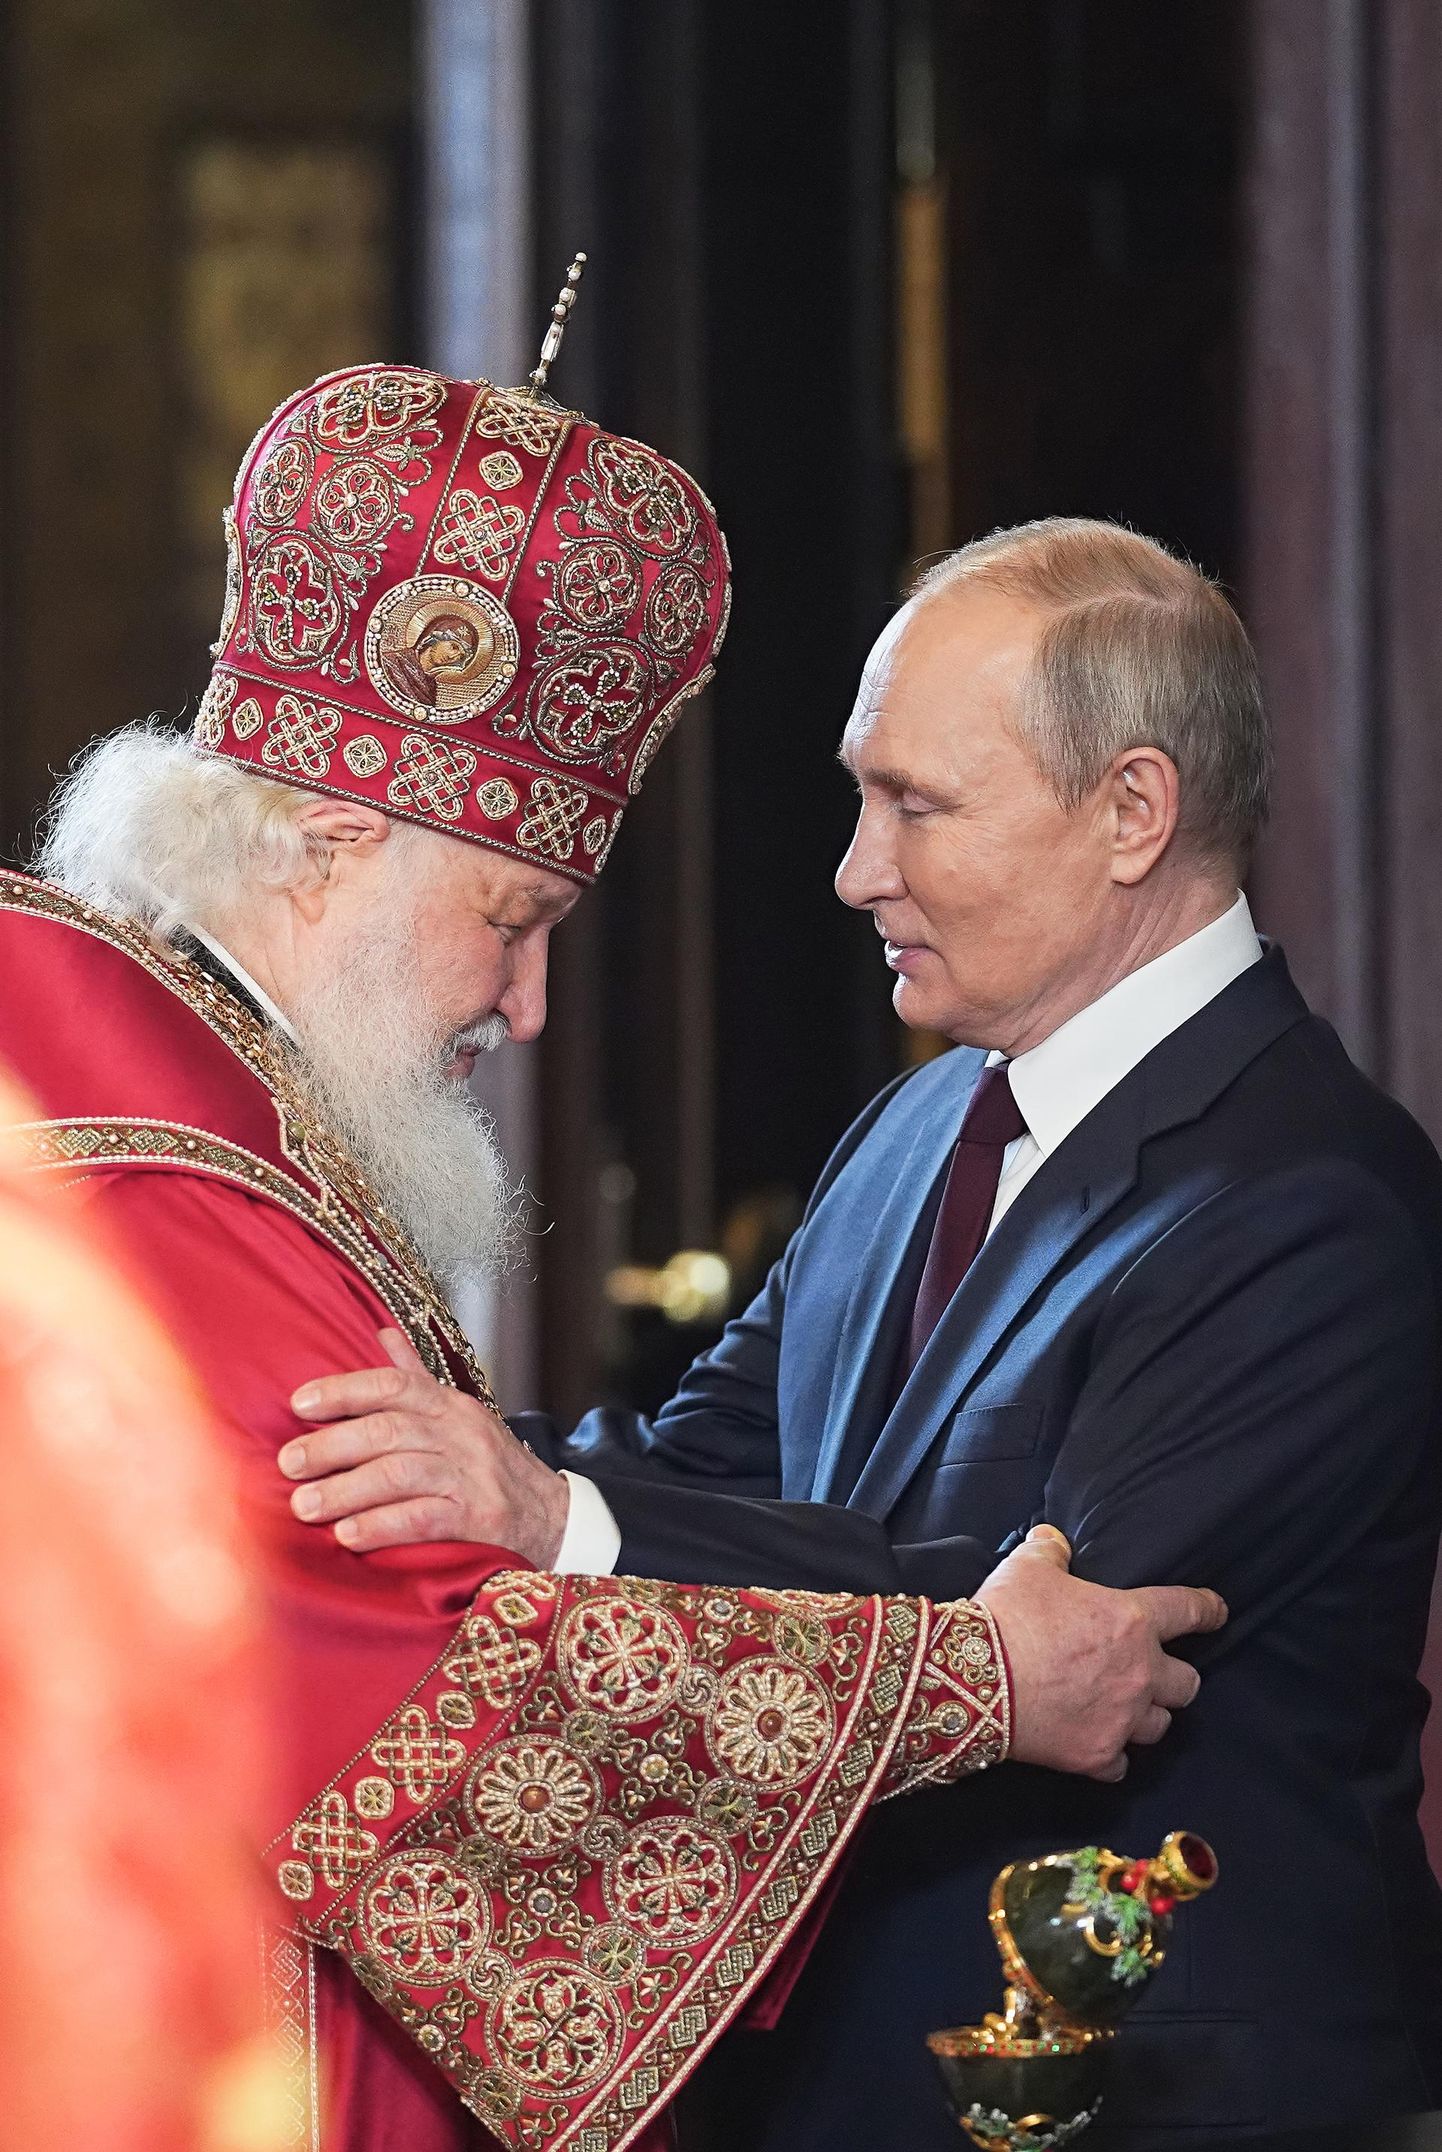 In Russia, the Orthodox Church has always been in the service of the ruler and closely related to the exercise of power. Patriarch Kirill with Russian President Vladimir Putin.